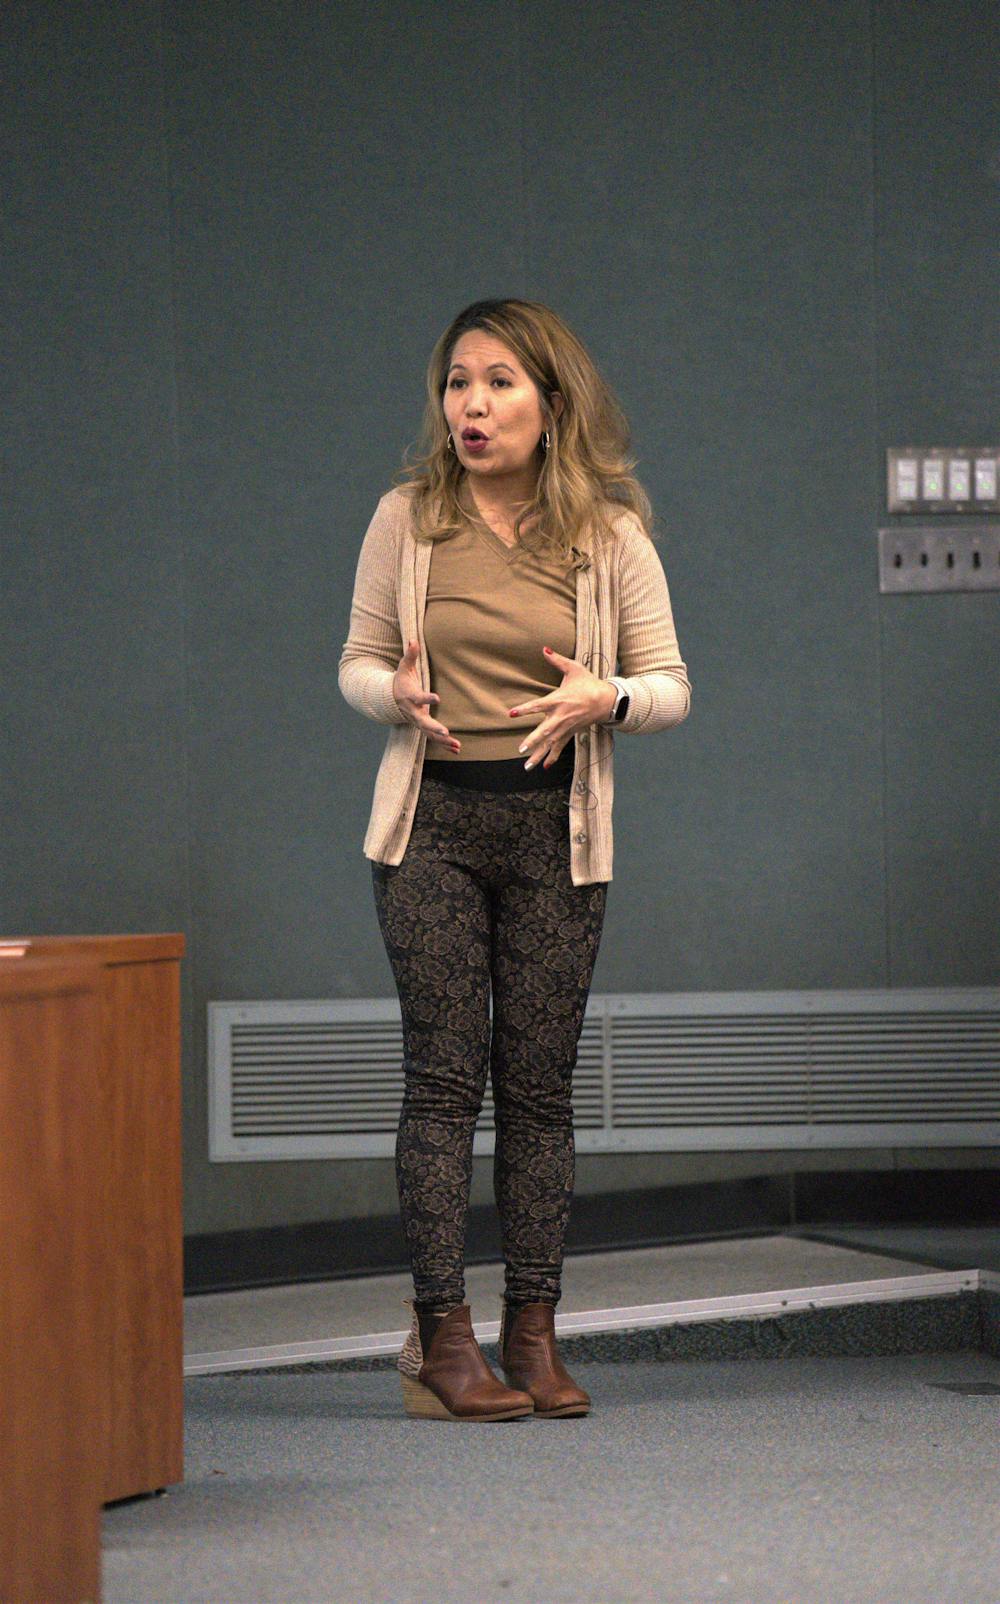 <p><strong>Presenter Regina Gong, a Student Success Librarian, presented the topic of an Open Educational Resource during the ASMSU General Assembly on Dec. 8, 2022. The meeting was held at the International Center. </strong><br/><br/></p>